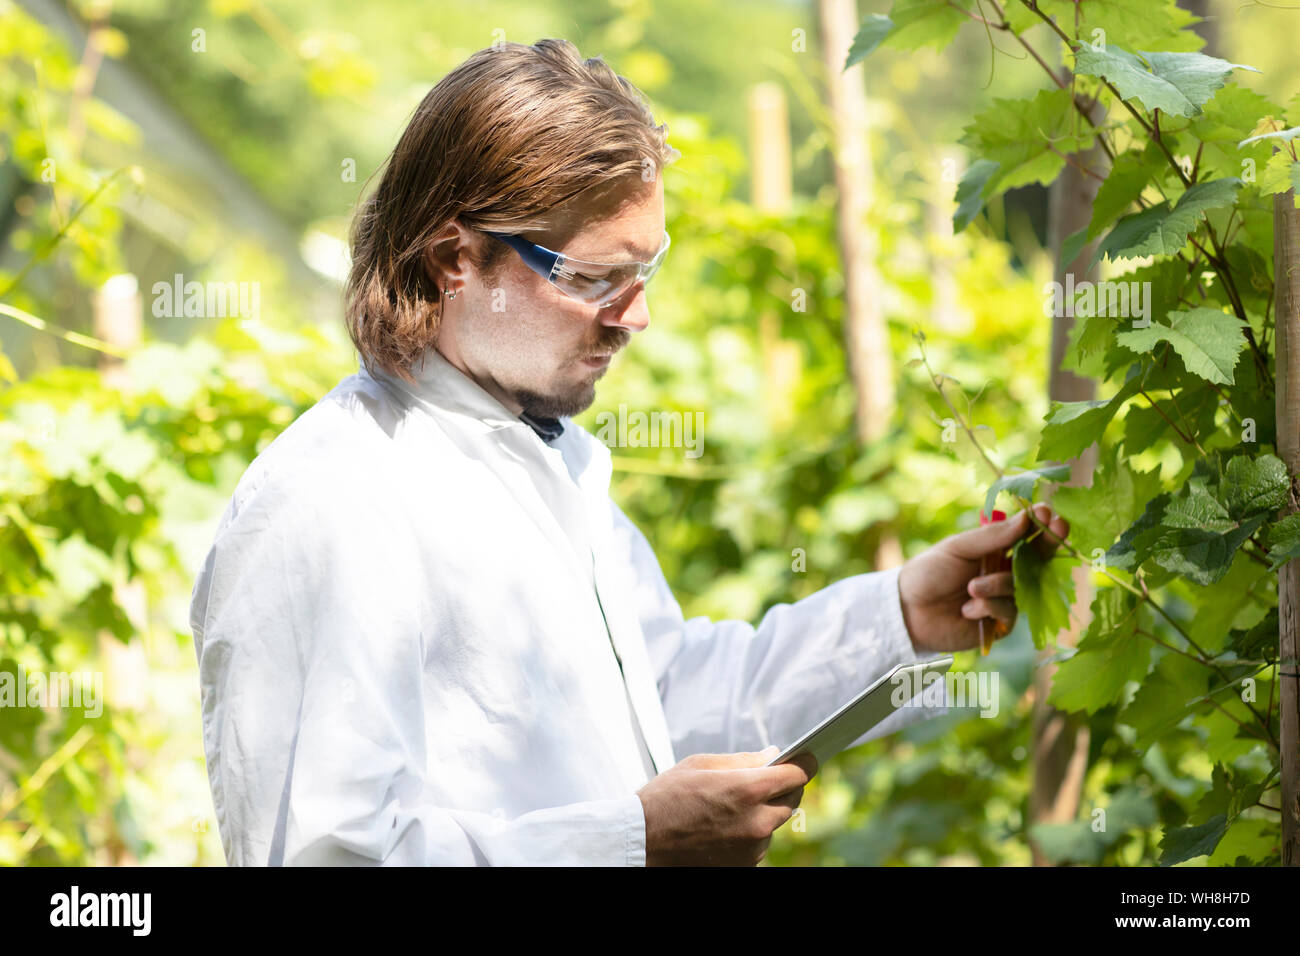 Researcher in a laboratory coat examining plants outside Stock Photo